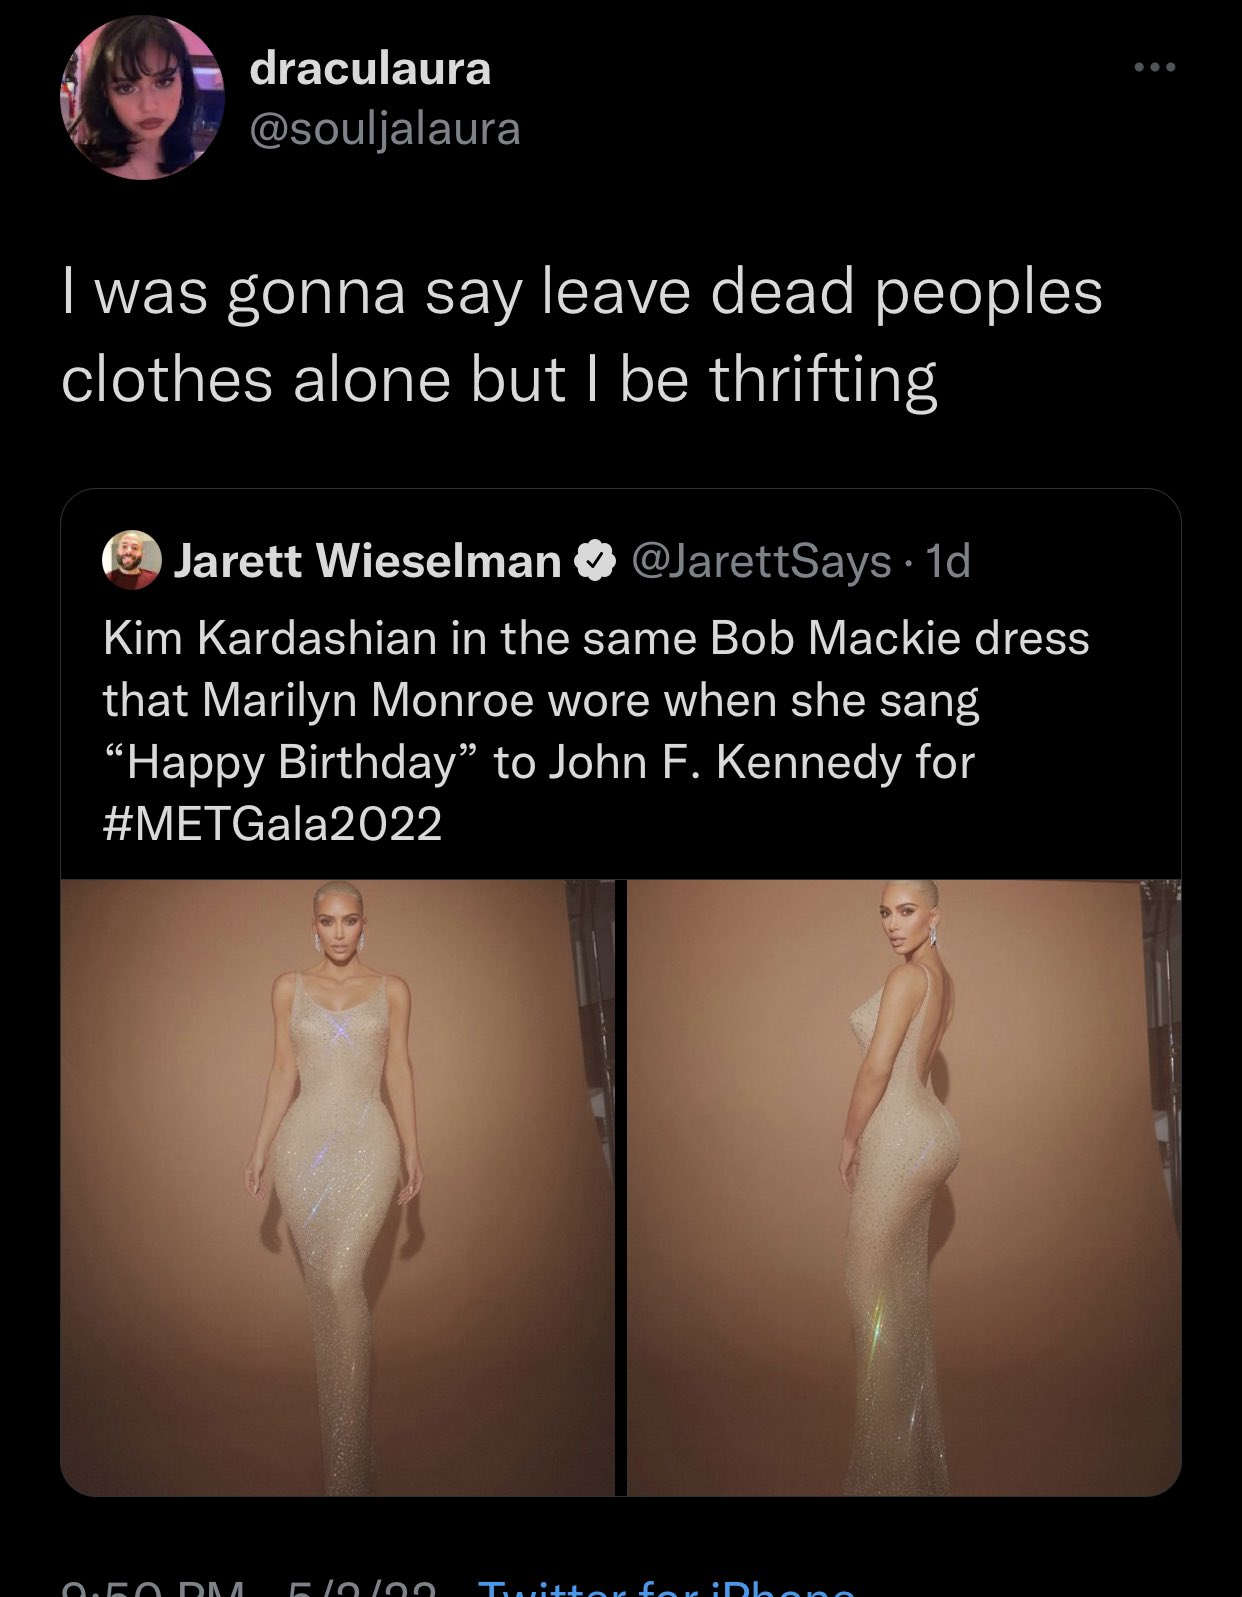 Unhinged Tweets - human - draculaura I was gonna say leave dead peoples clothes alone but I be thrifting Jarett Wieselman . 1d Kim Kardashian in the same Bob Mackie dress that Marilyn Monroe wore when she sang "Happy Birthday" to John F. Kennedy for 0.50 